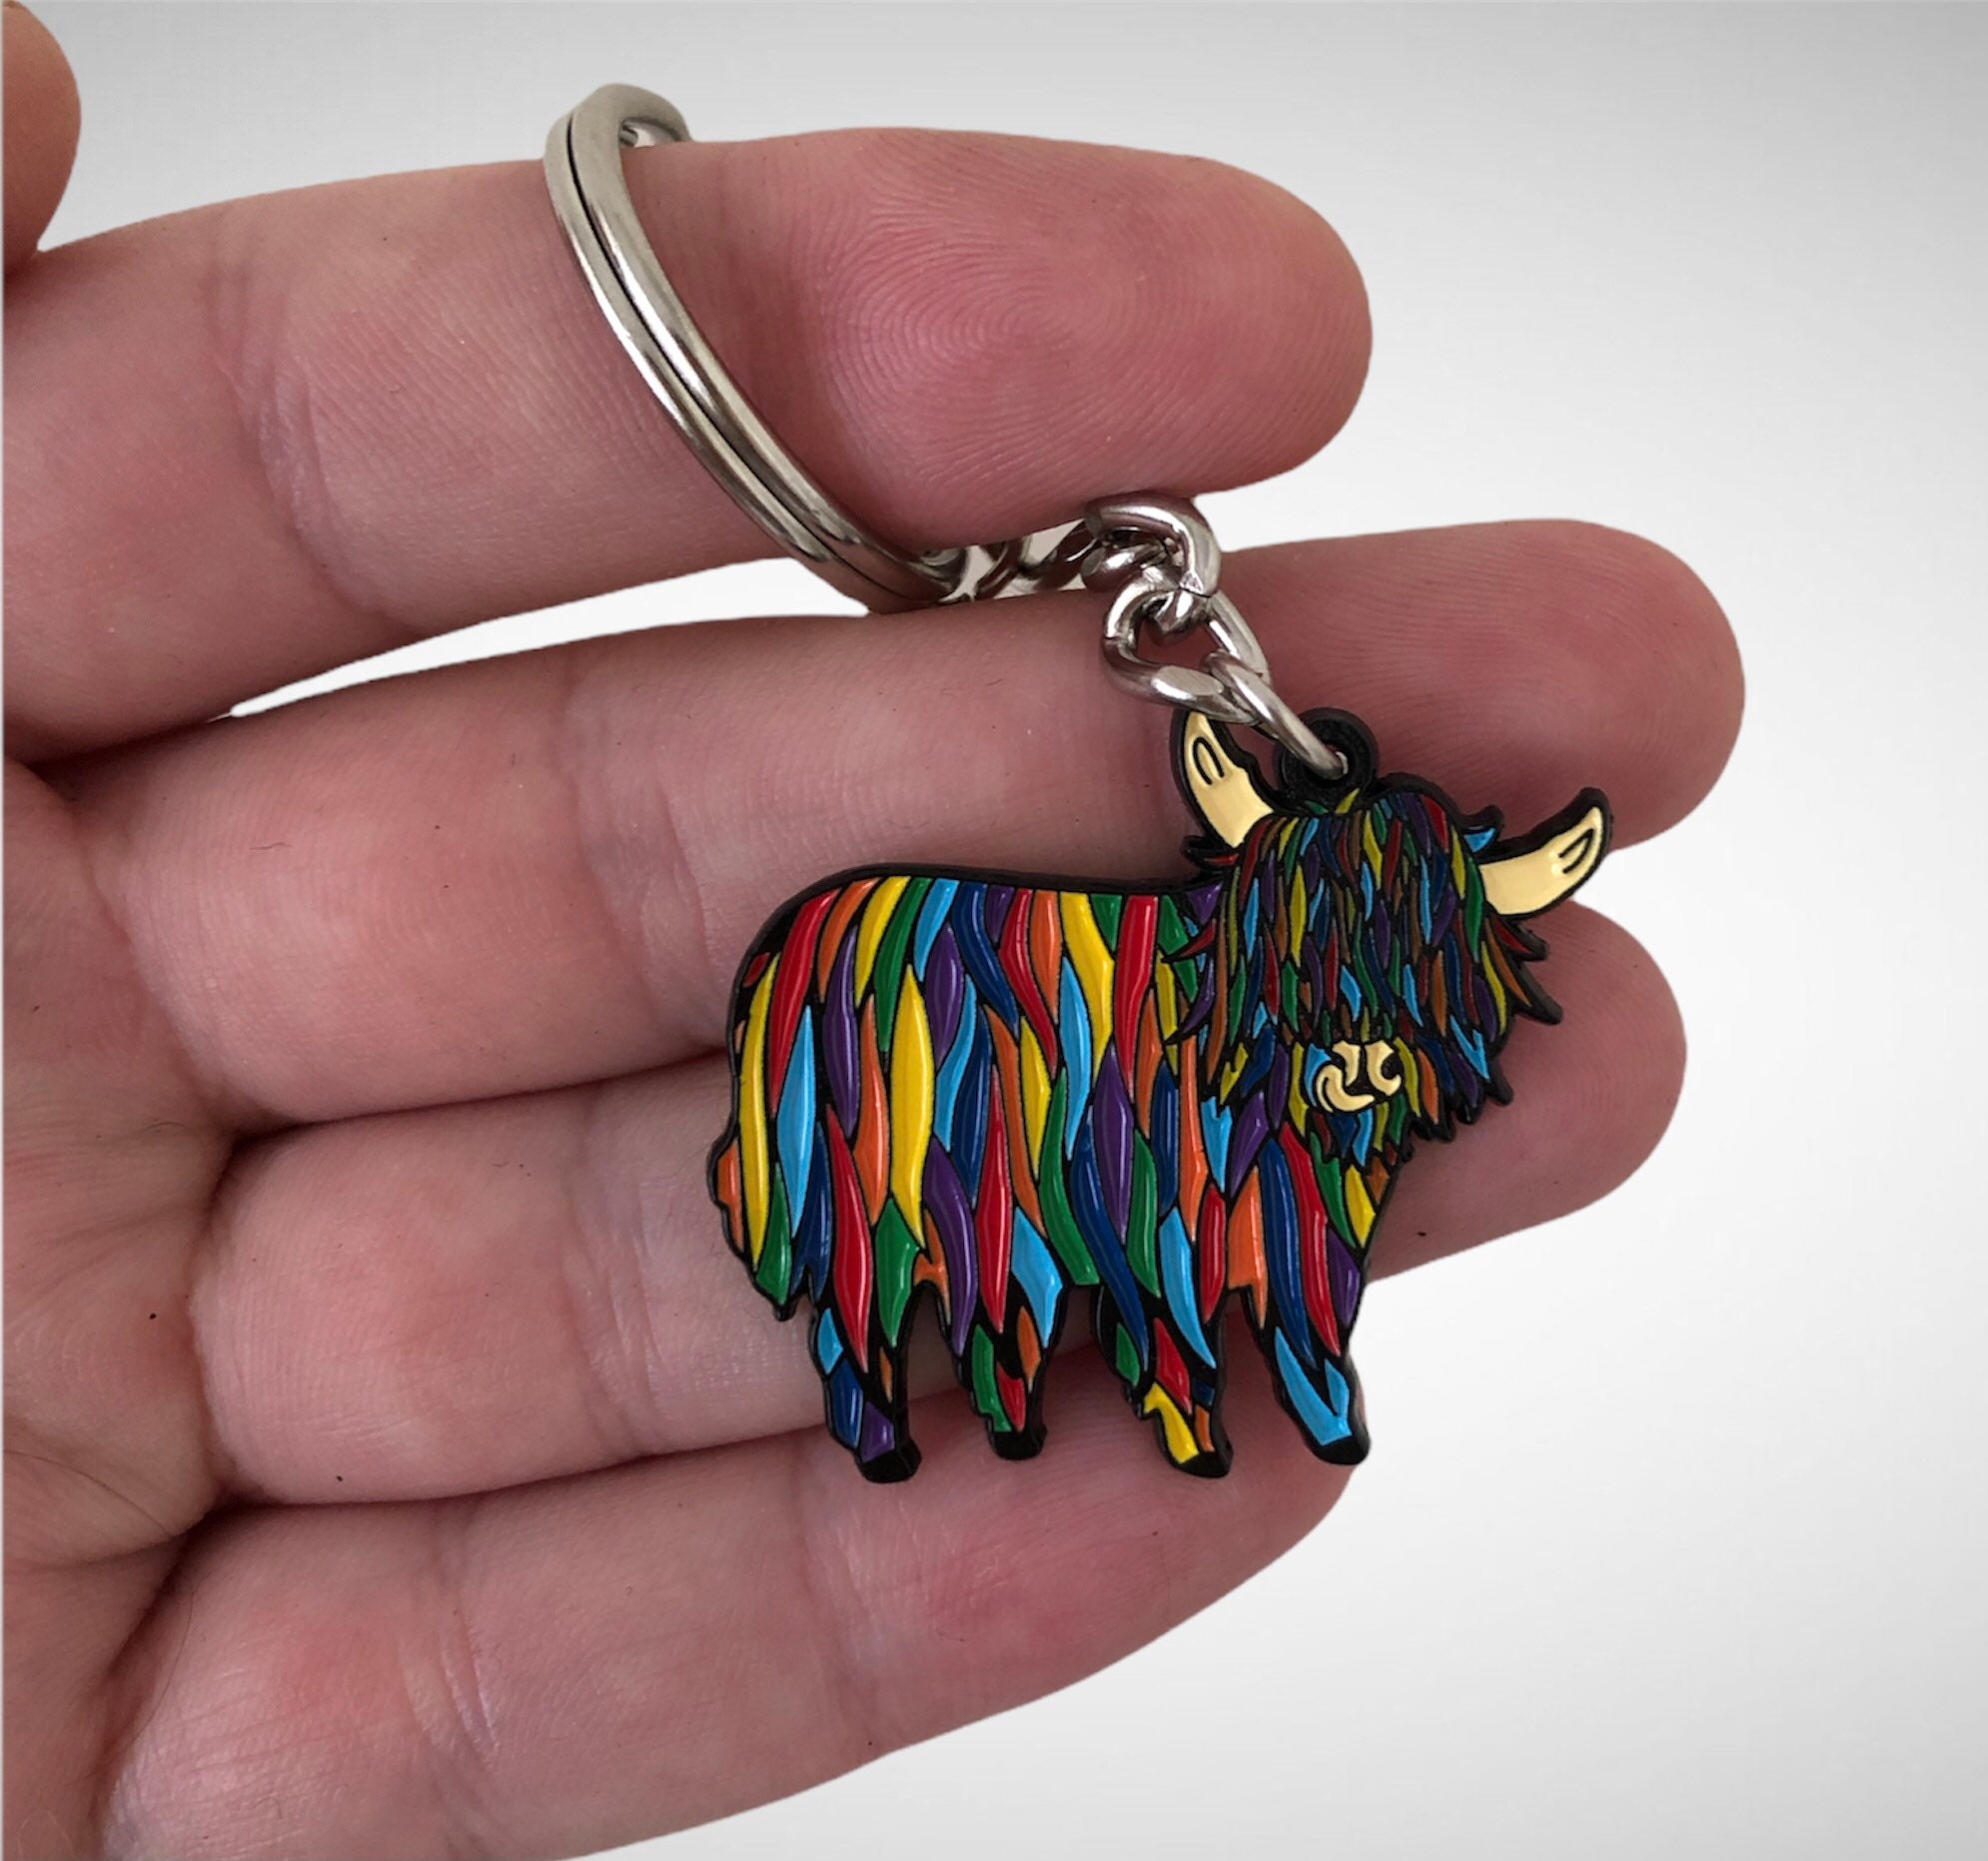 Keyring - Highland Cow - Loch Ness Gifts